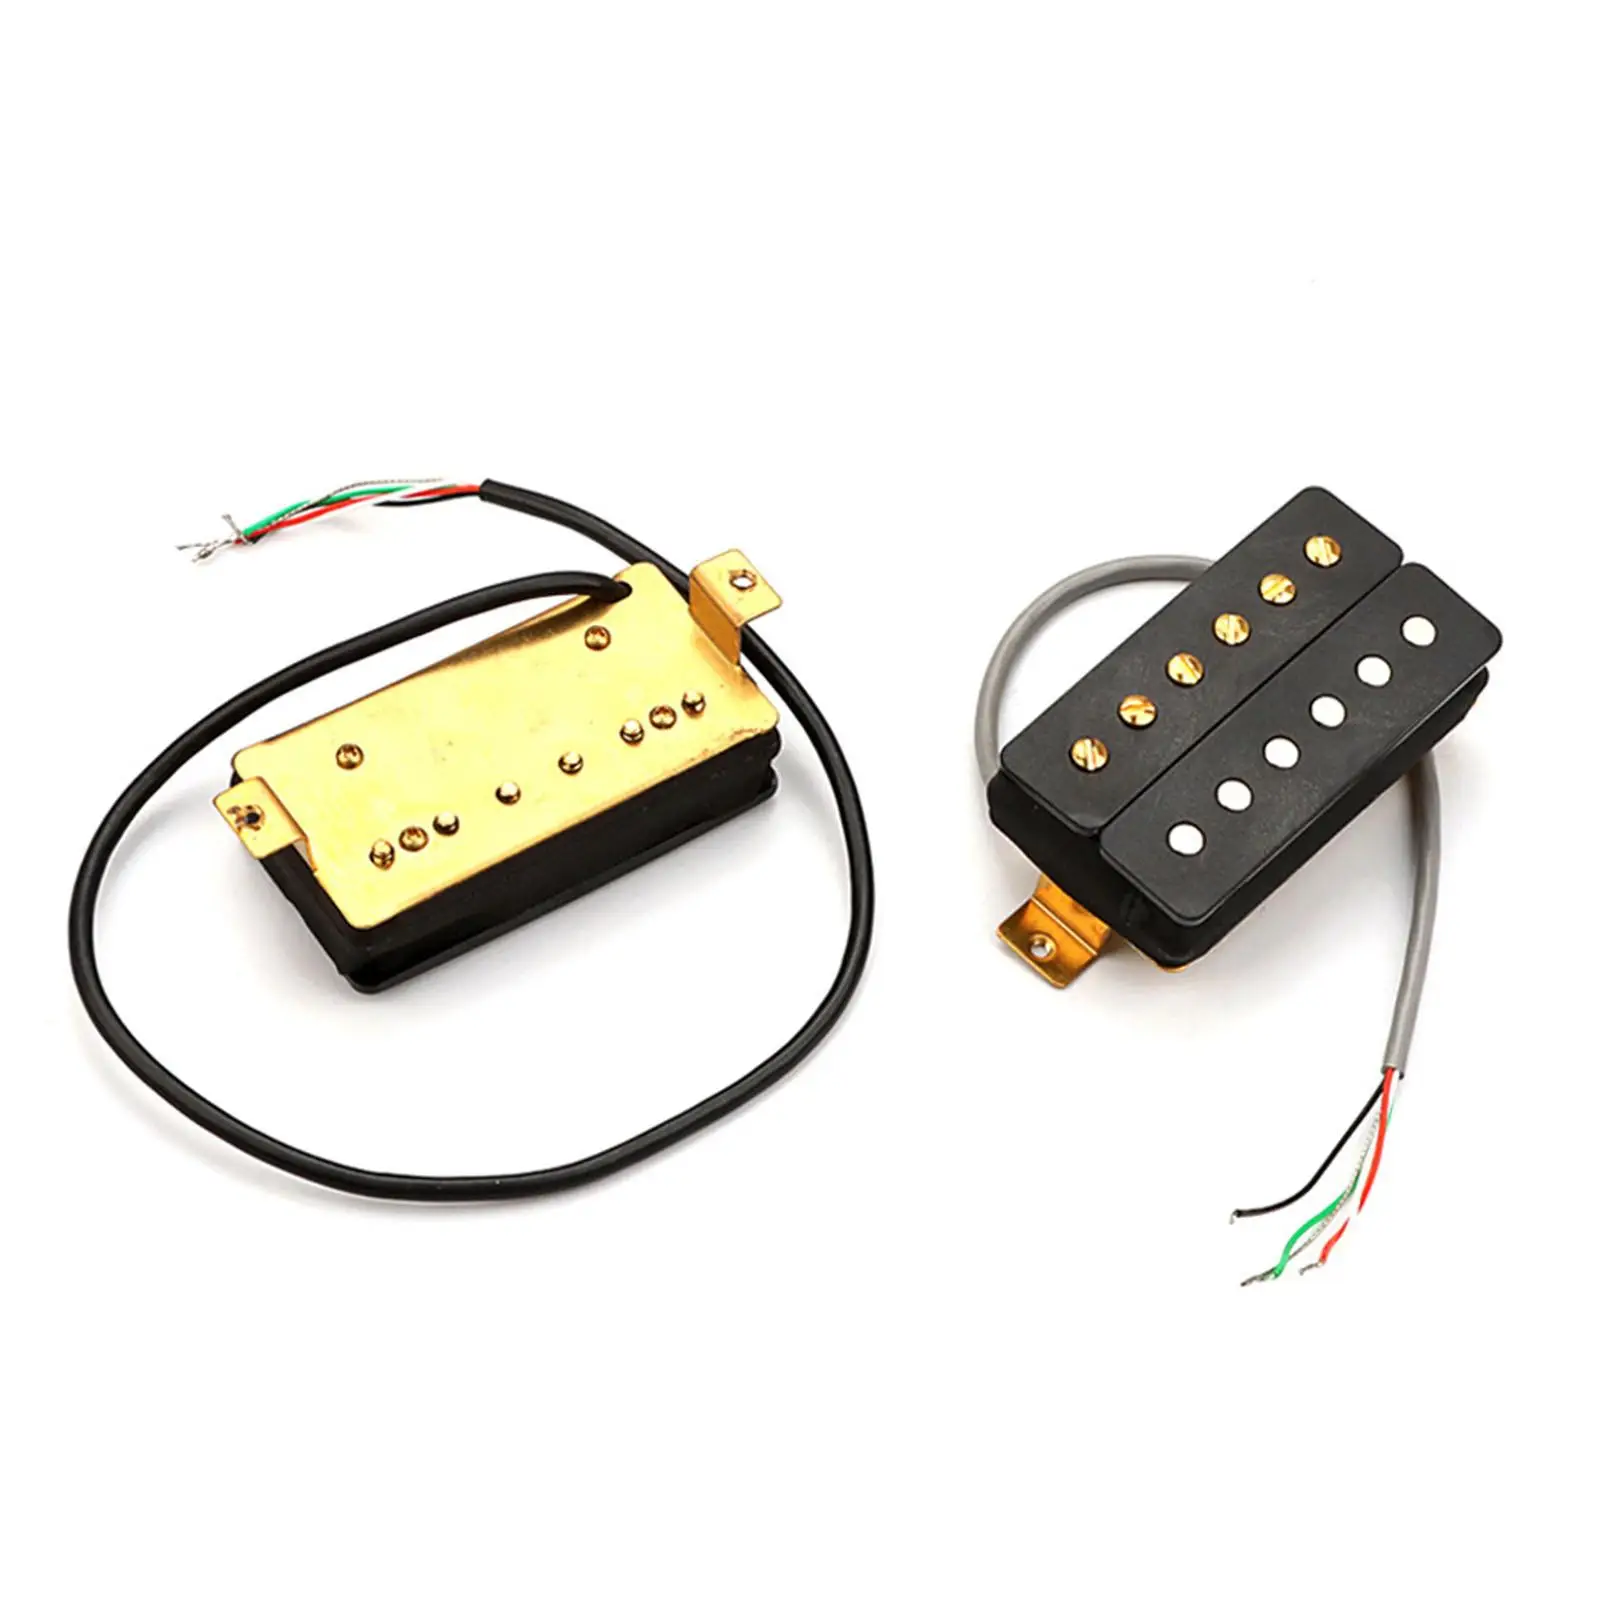 

2 Pieces Double Coil Ceramic Pickup for 6 Strings Guitar Low Noise Professional Musical Instruments High Output Humbucker Pickup